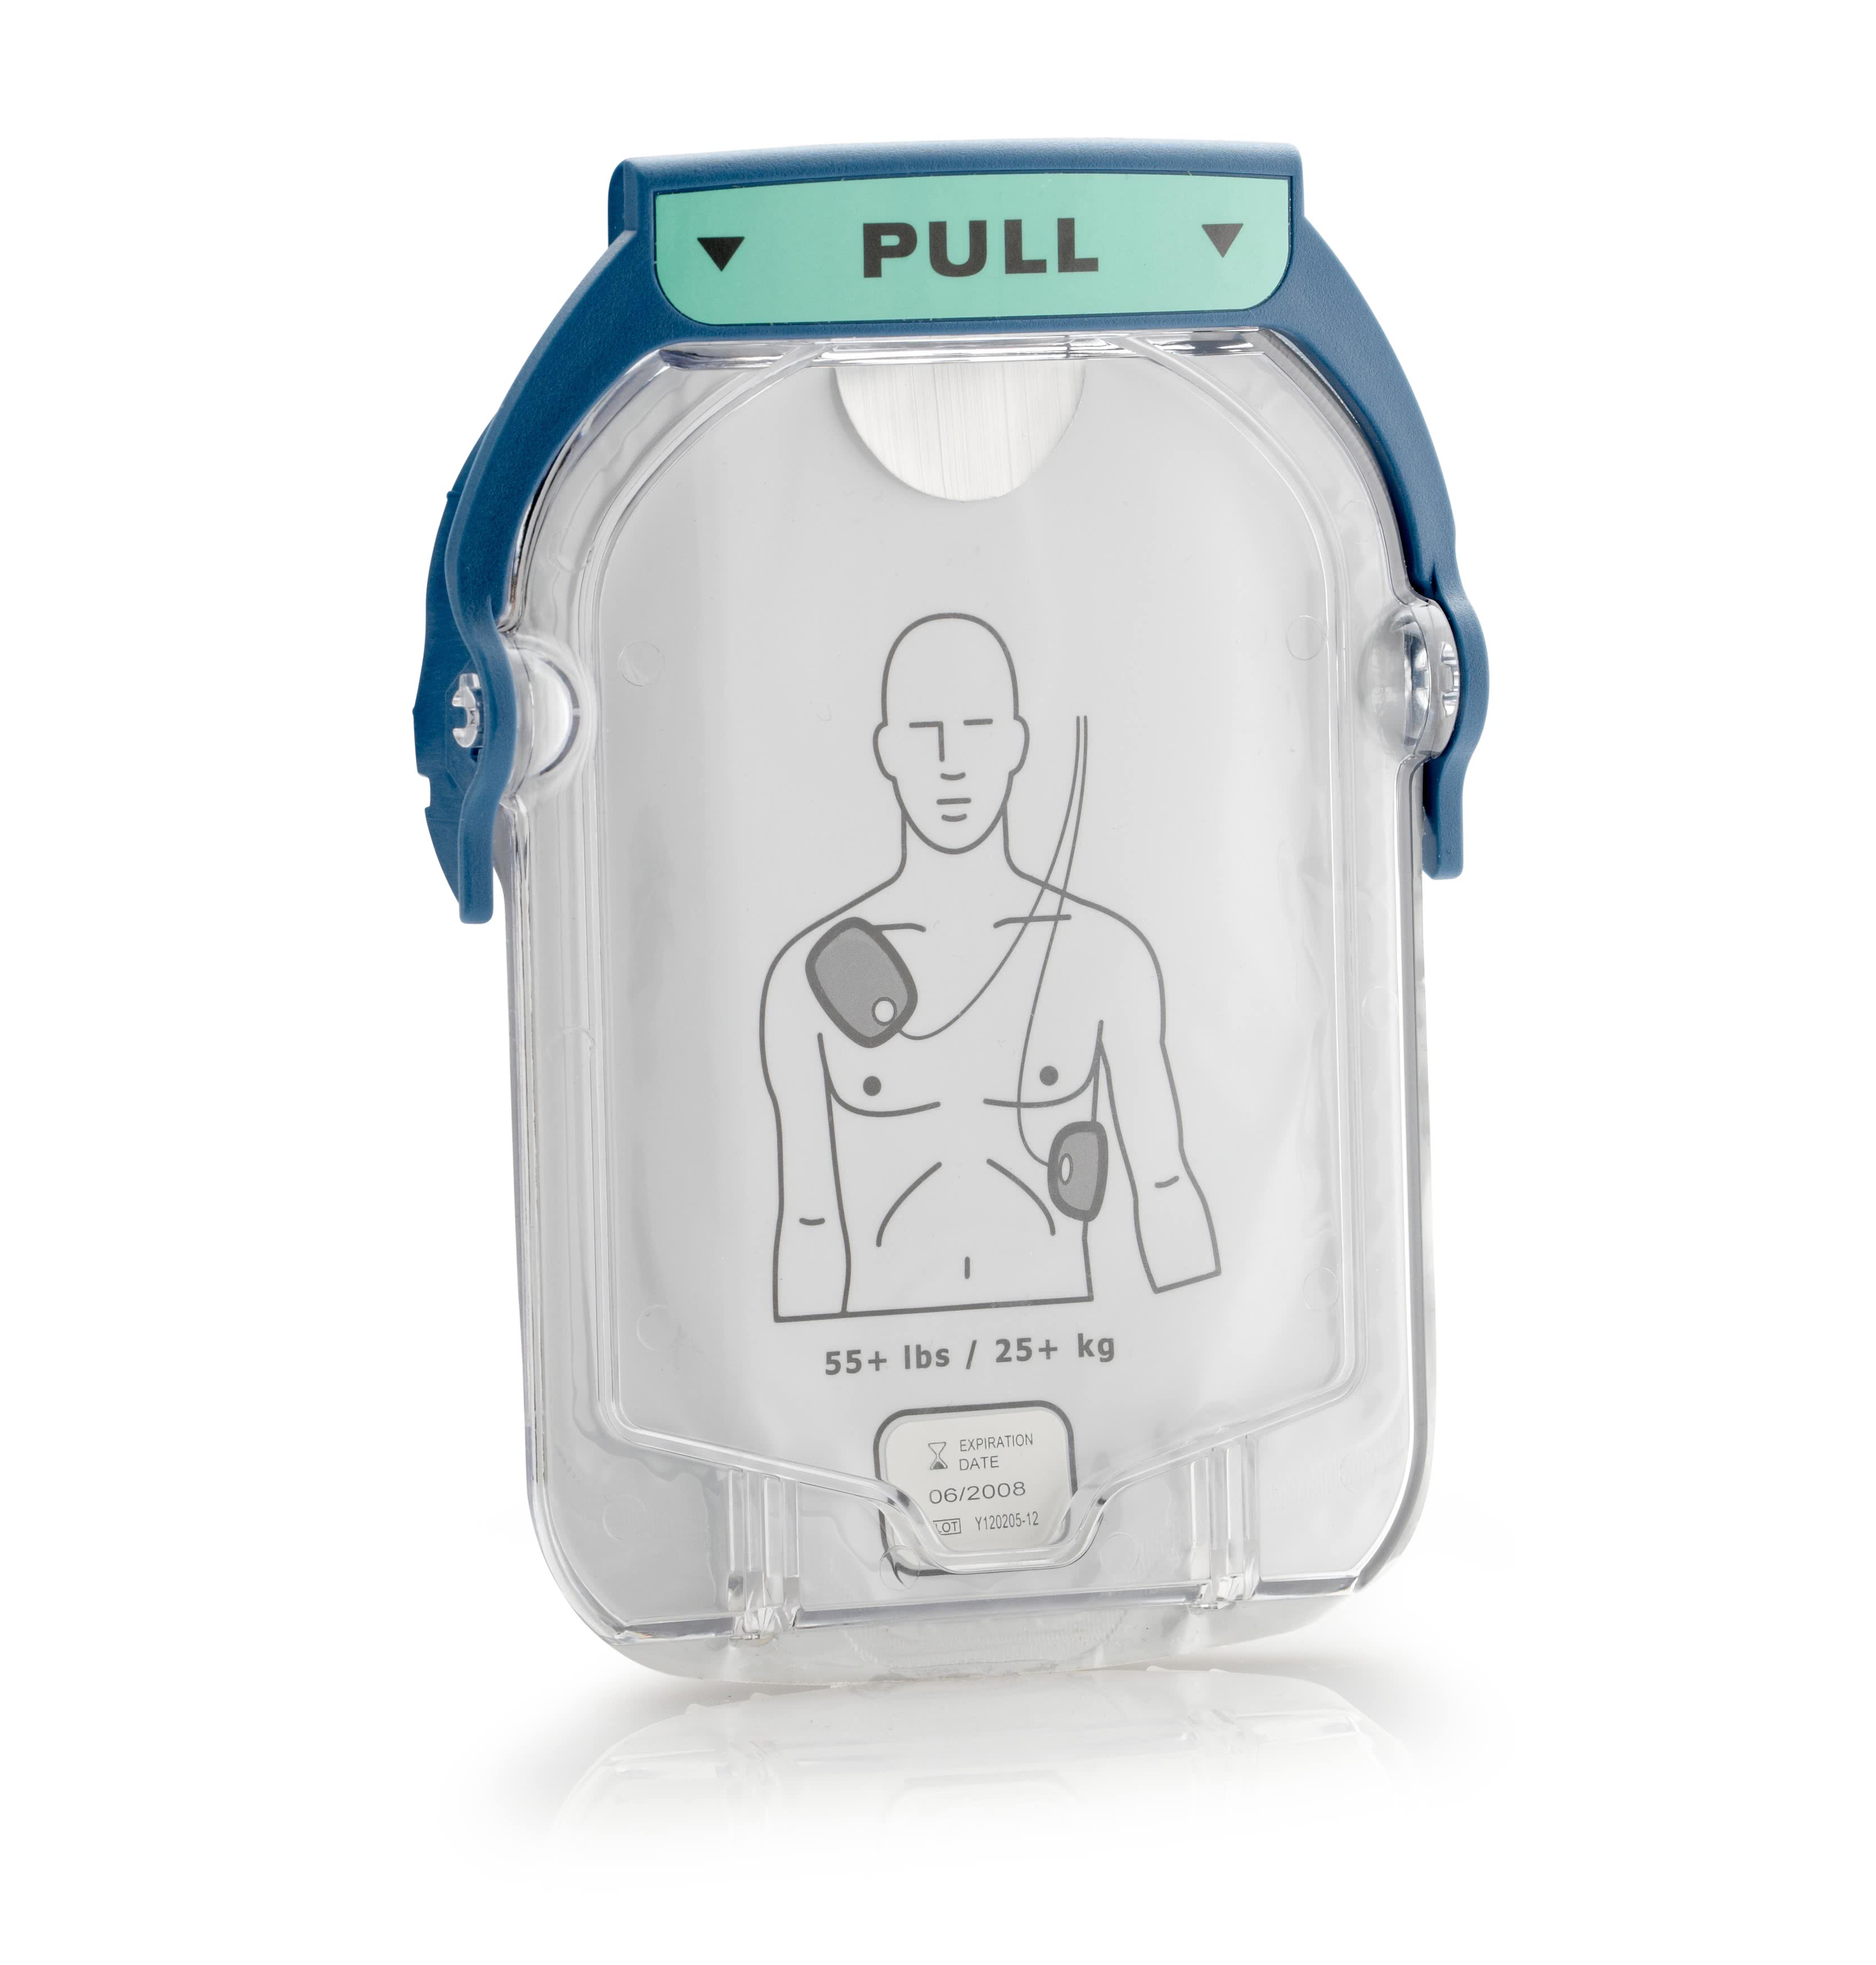 Onsite AED with Ready Pack and Wall Mount image